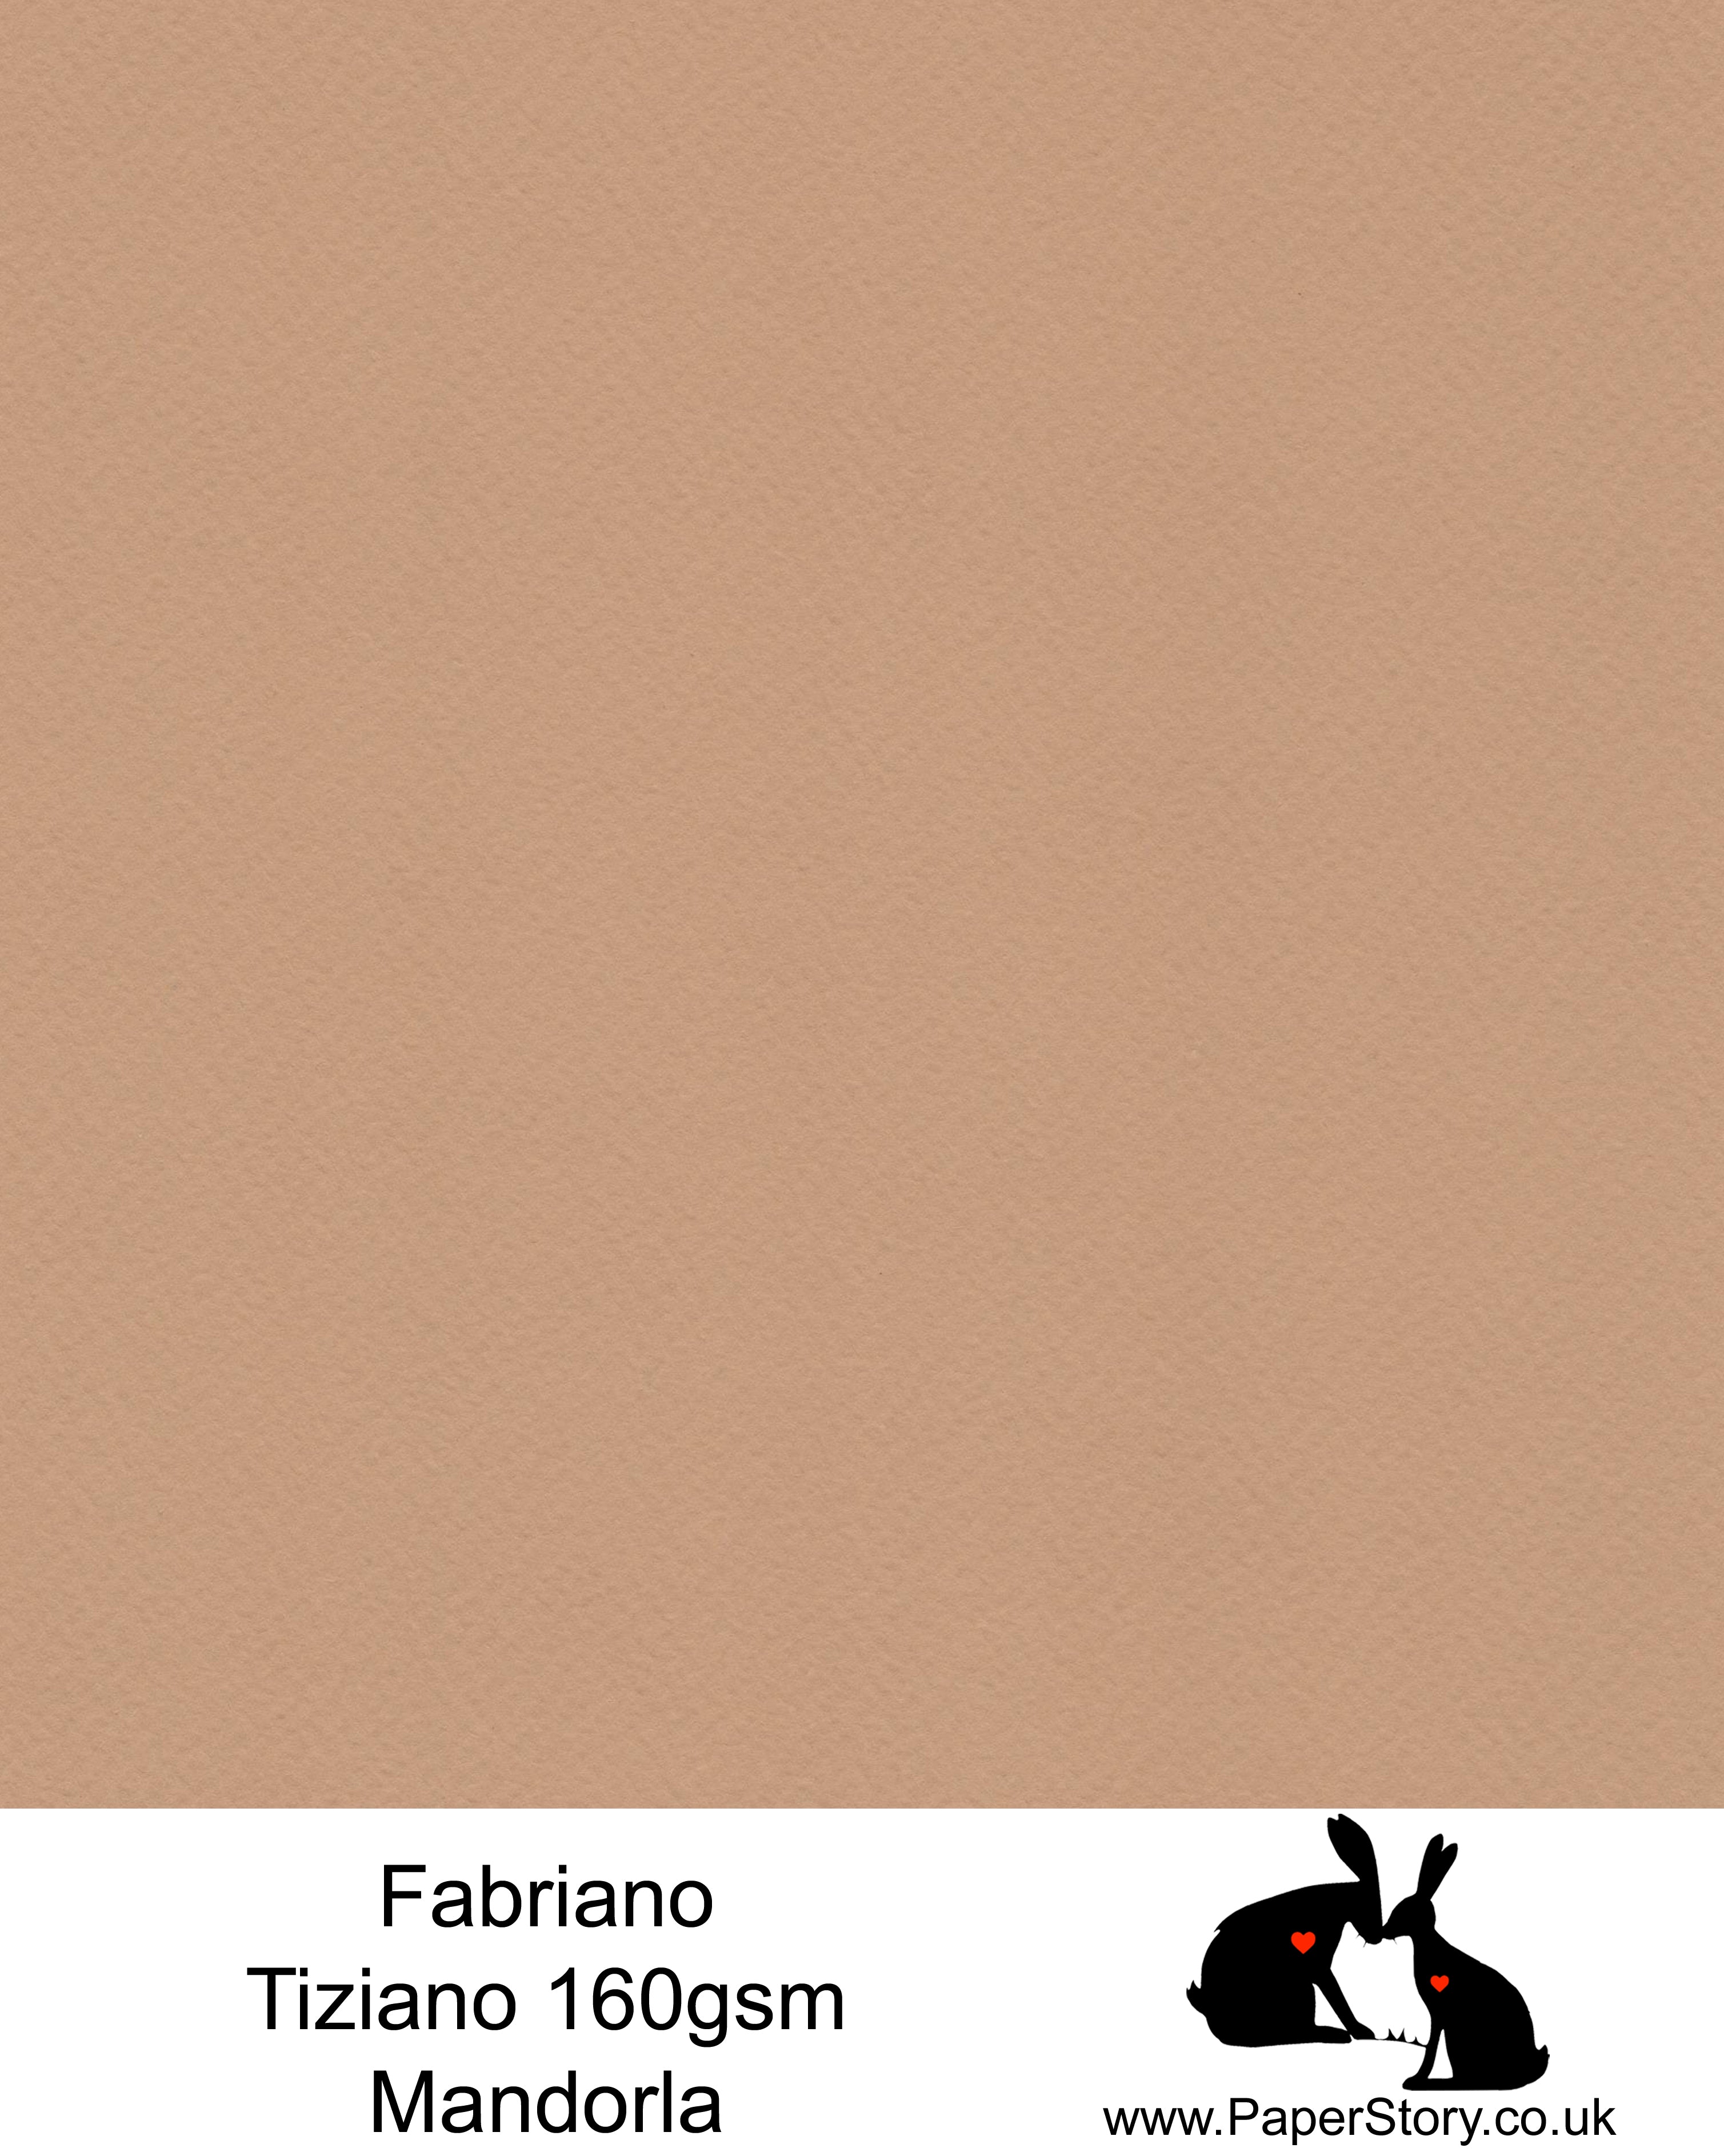 High quality paper from Italy, Mandorla warm brown with a hint of pink. Fabriano Tiziano is 160 gsm, Tiziano has a high cotton content, a textured naturally sized surface. This paper is acid free to guarantee long permanence in time, pH neutral. It has highly lightfast colours, an excellent surface making and sizing which make this paper particularly suitable for papercutting, pastels, pencil, graphite, charcoal, tempera, air brush and watercolour techniques. Tiziano can be used for all printing techniques.